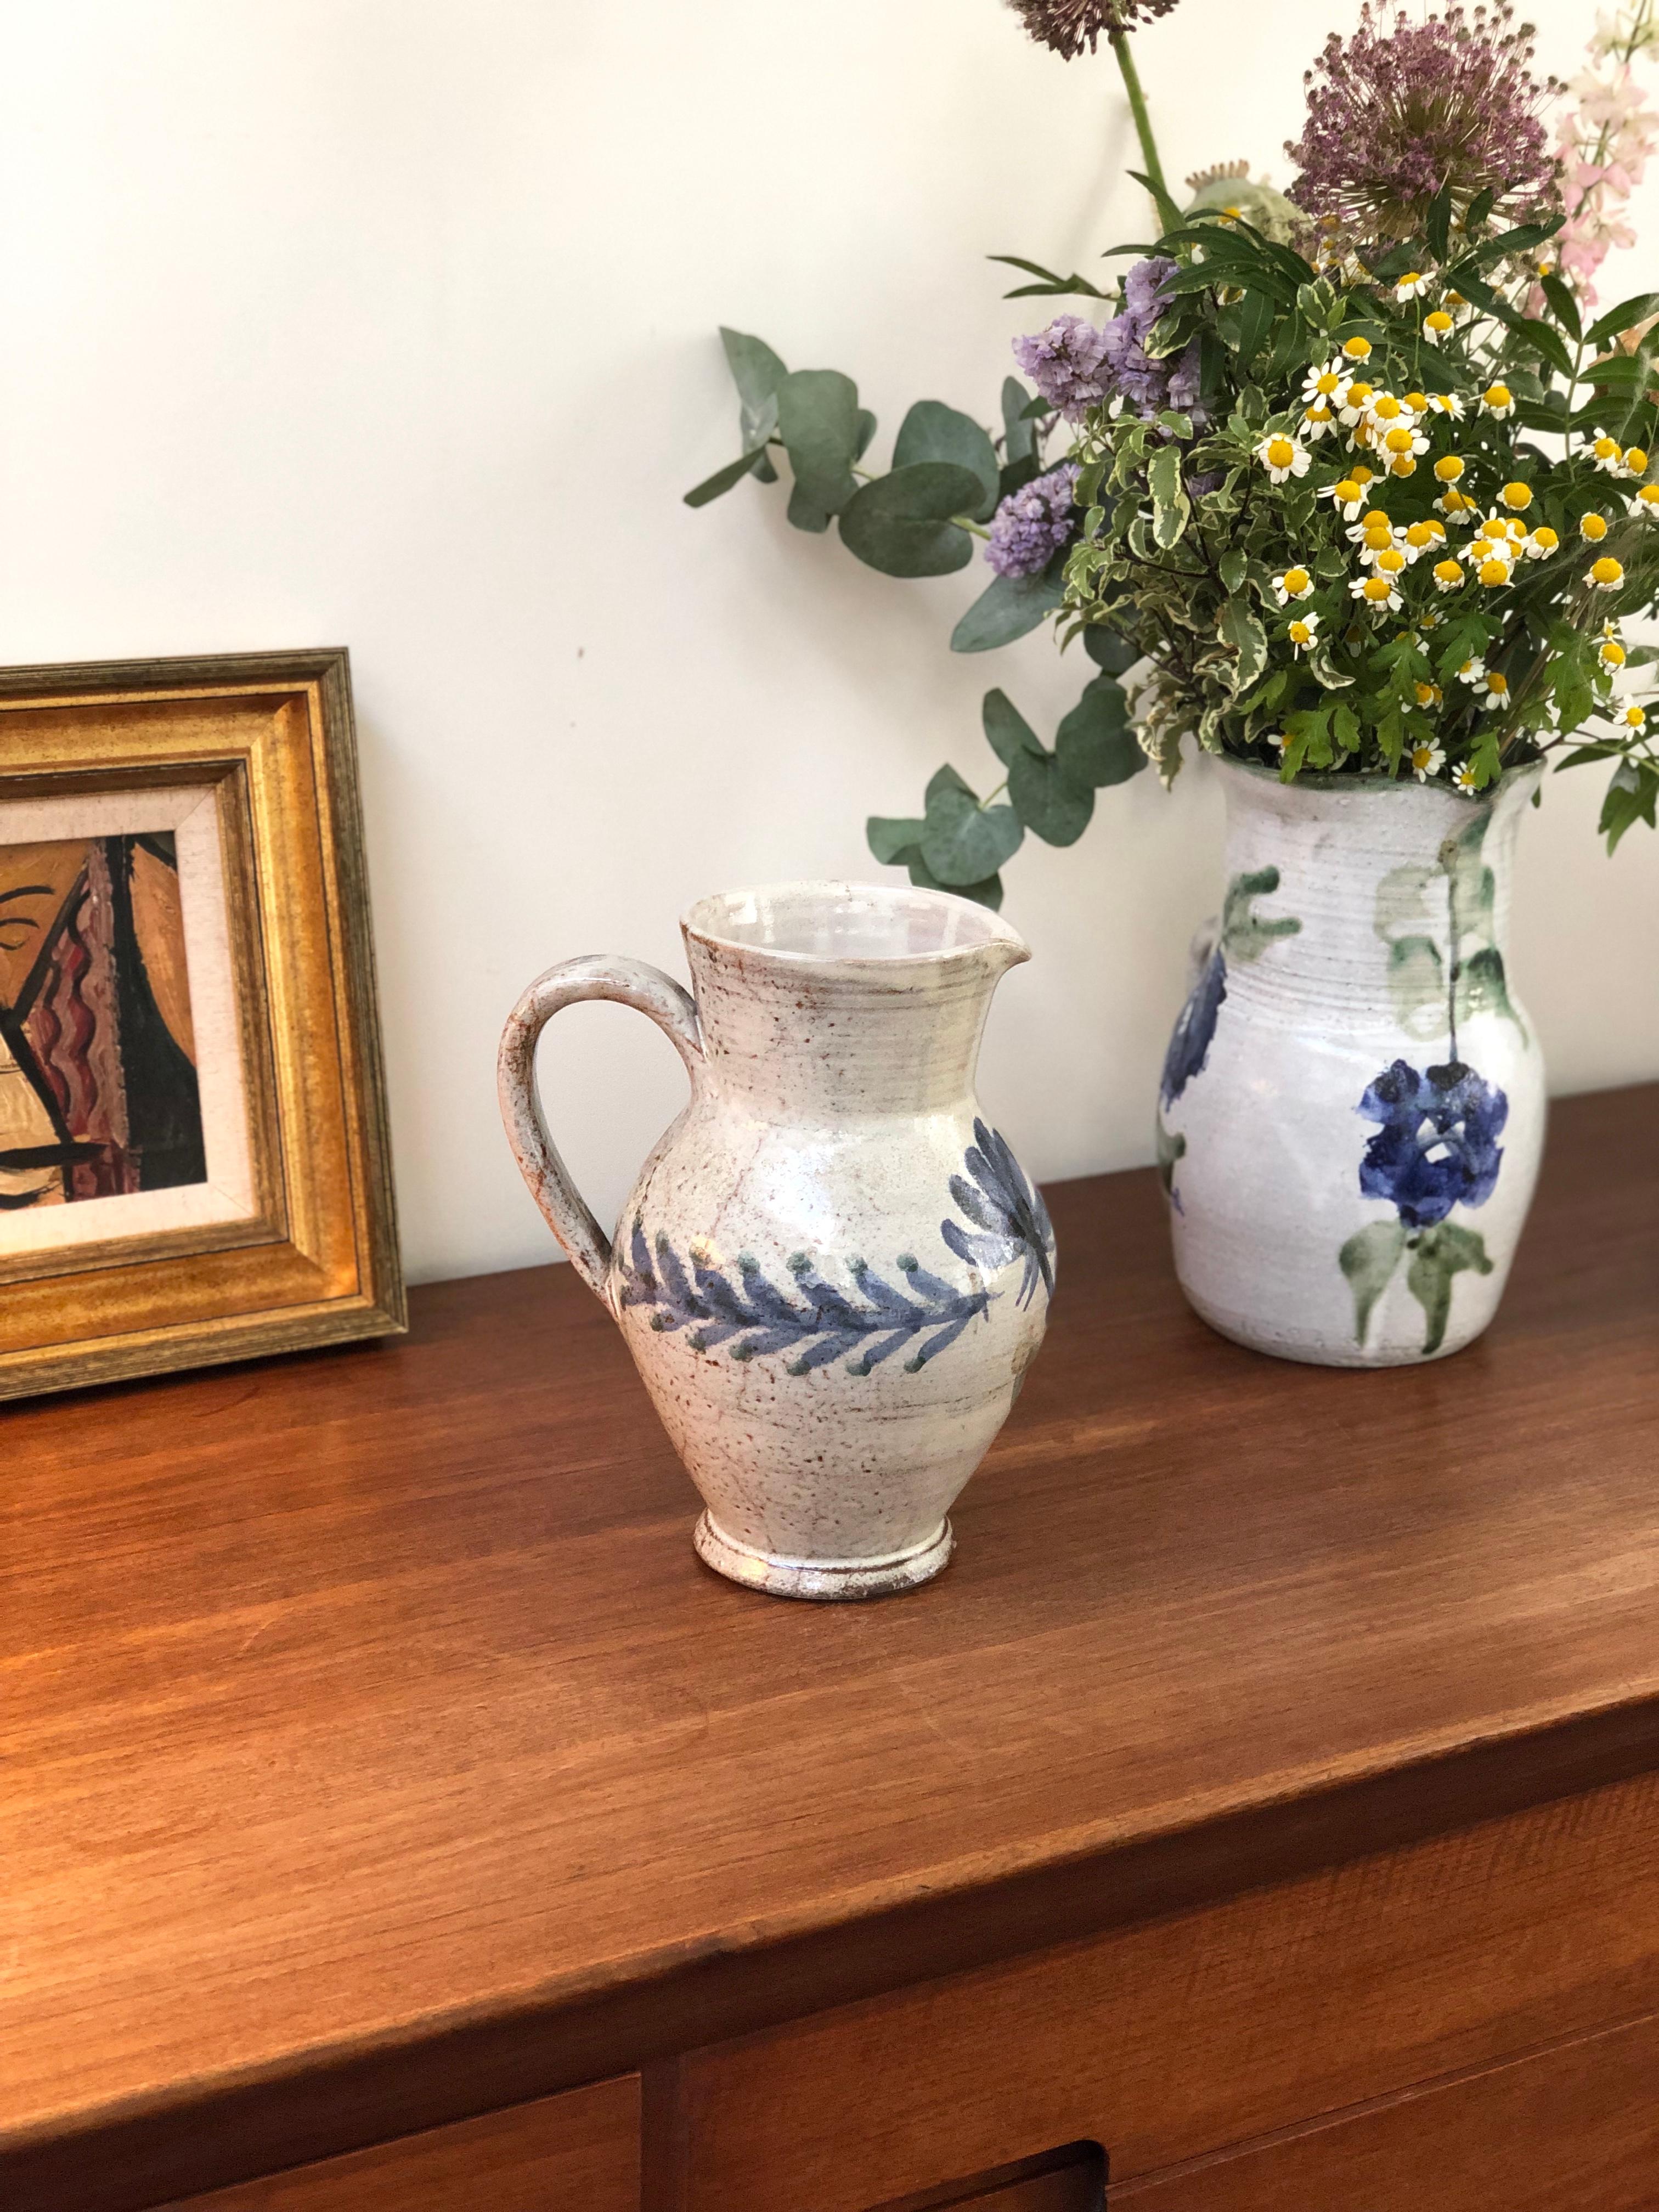 Hand-Painted Vintage French Ceramic Pitcher by Gustave Reynaud, Le Mûrier, circa 1950s